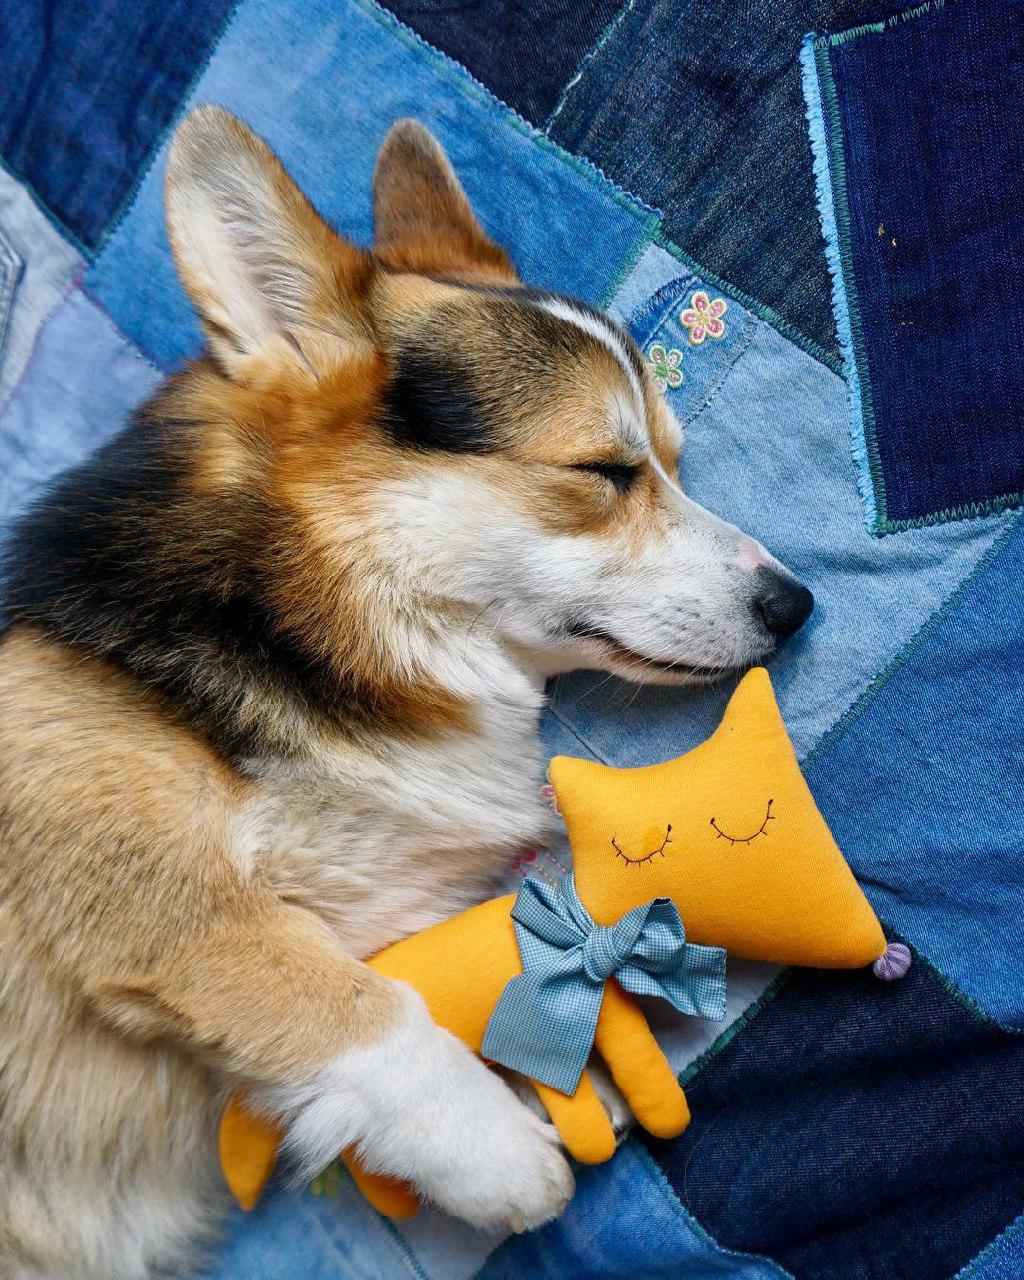 A Corgi sleeping soundly on its bed with its dog stuffed toy